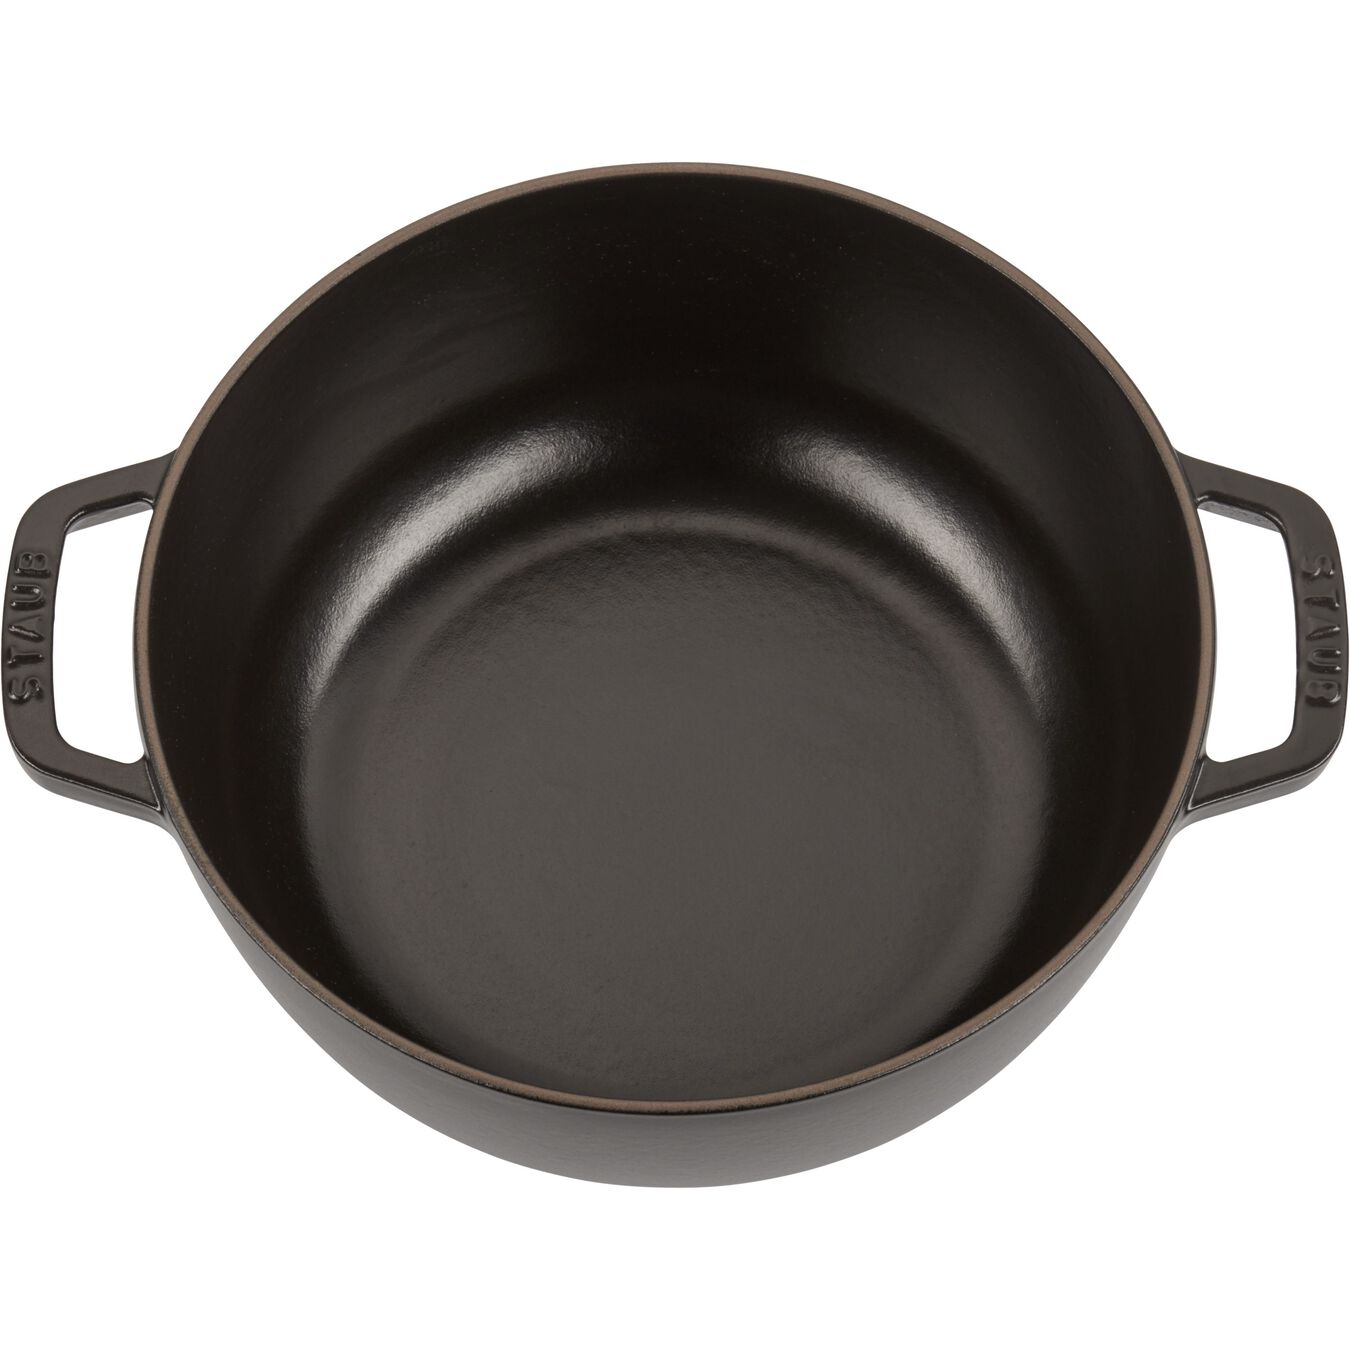 3.6 l cast iron round French oven, black,,large 2